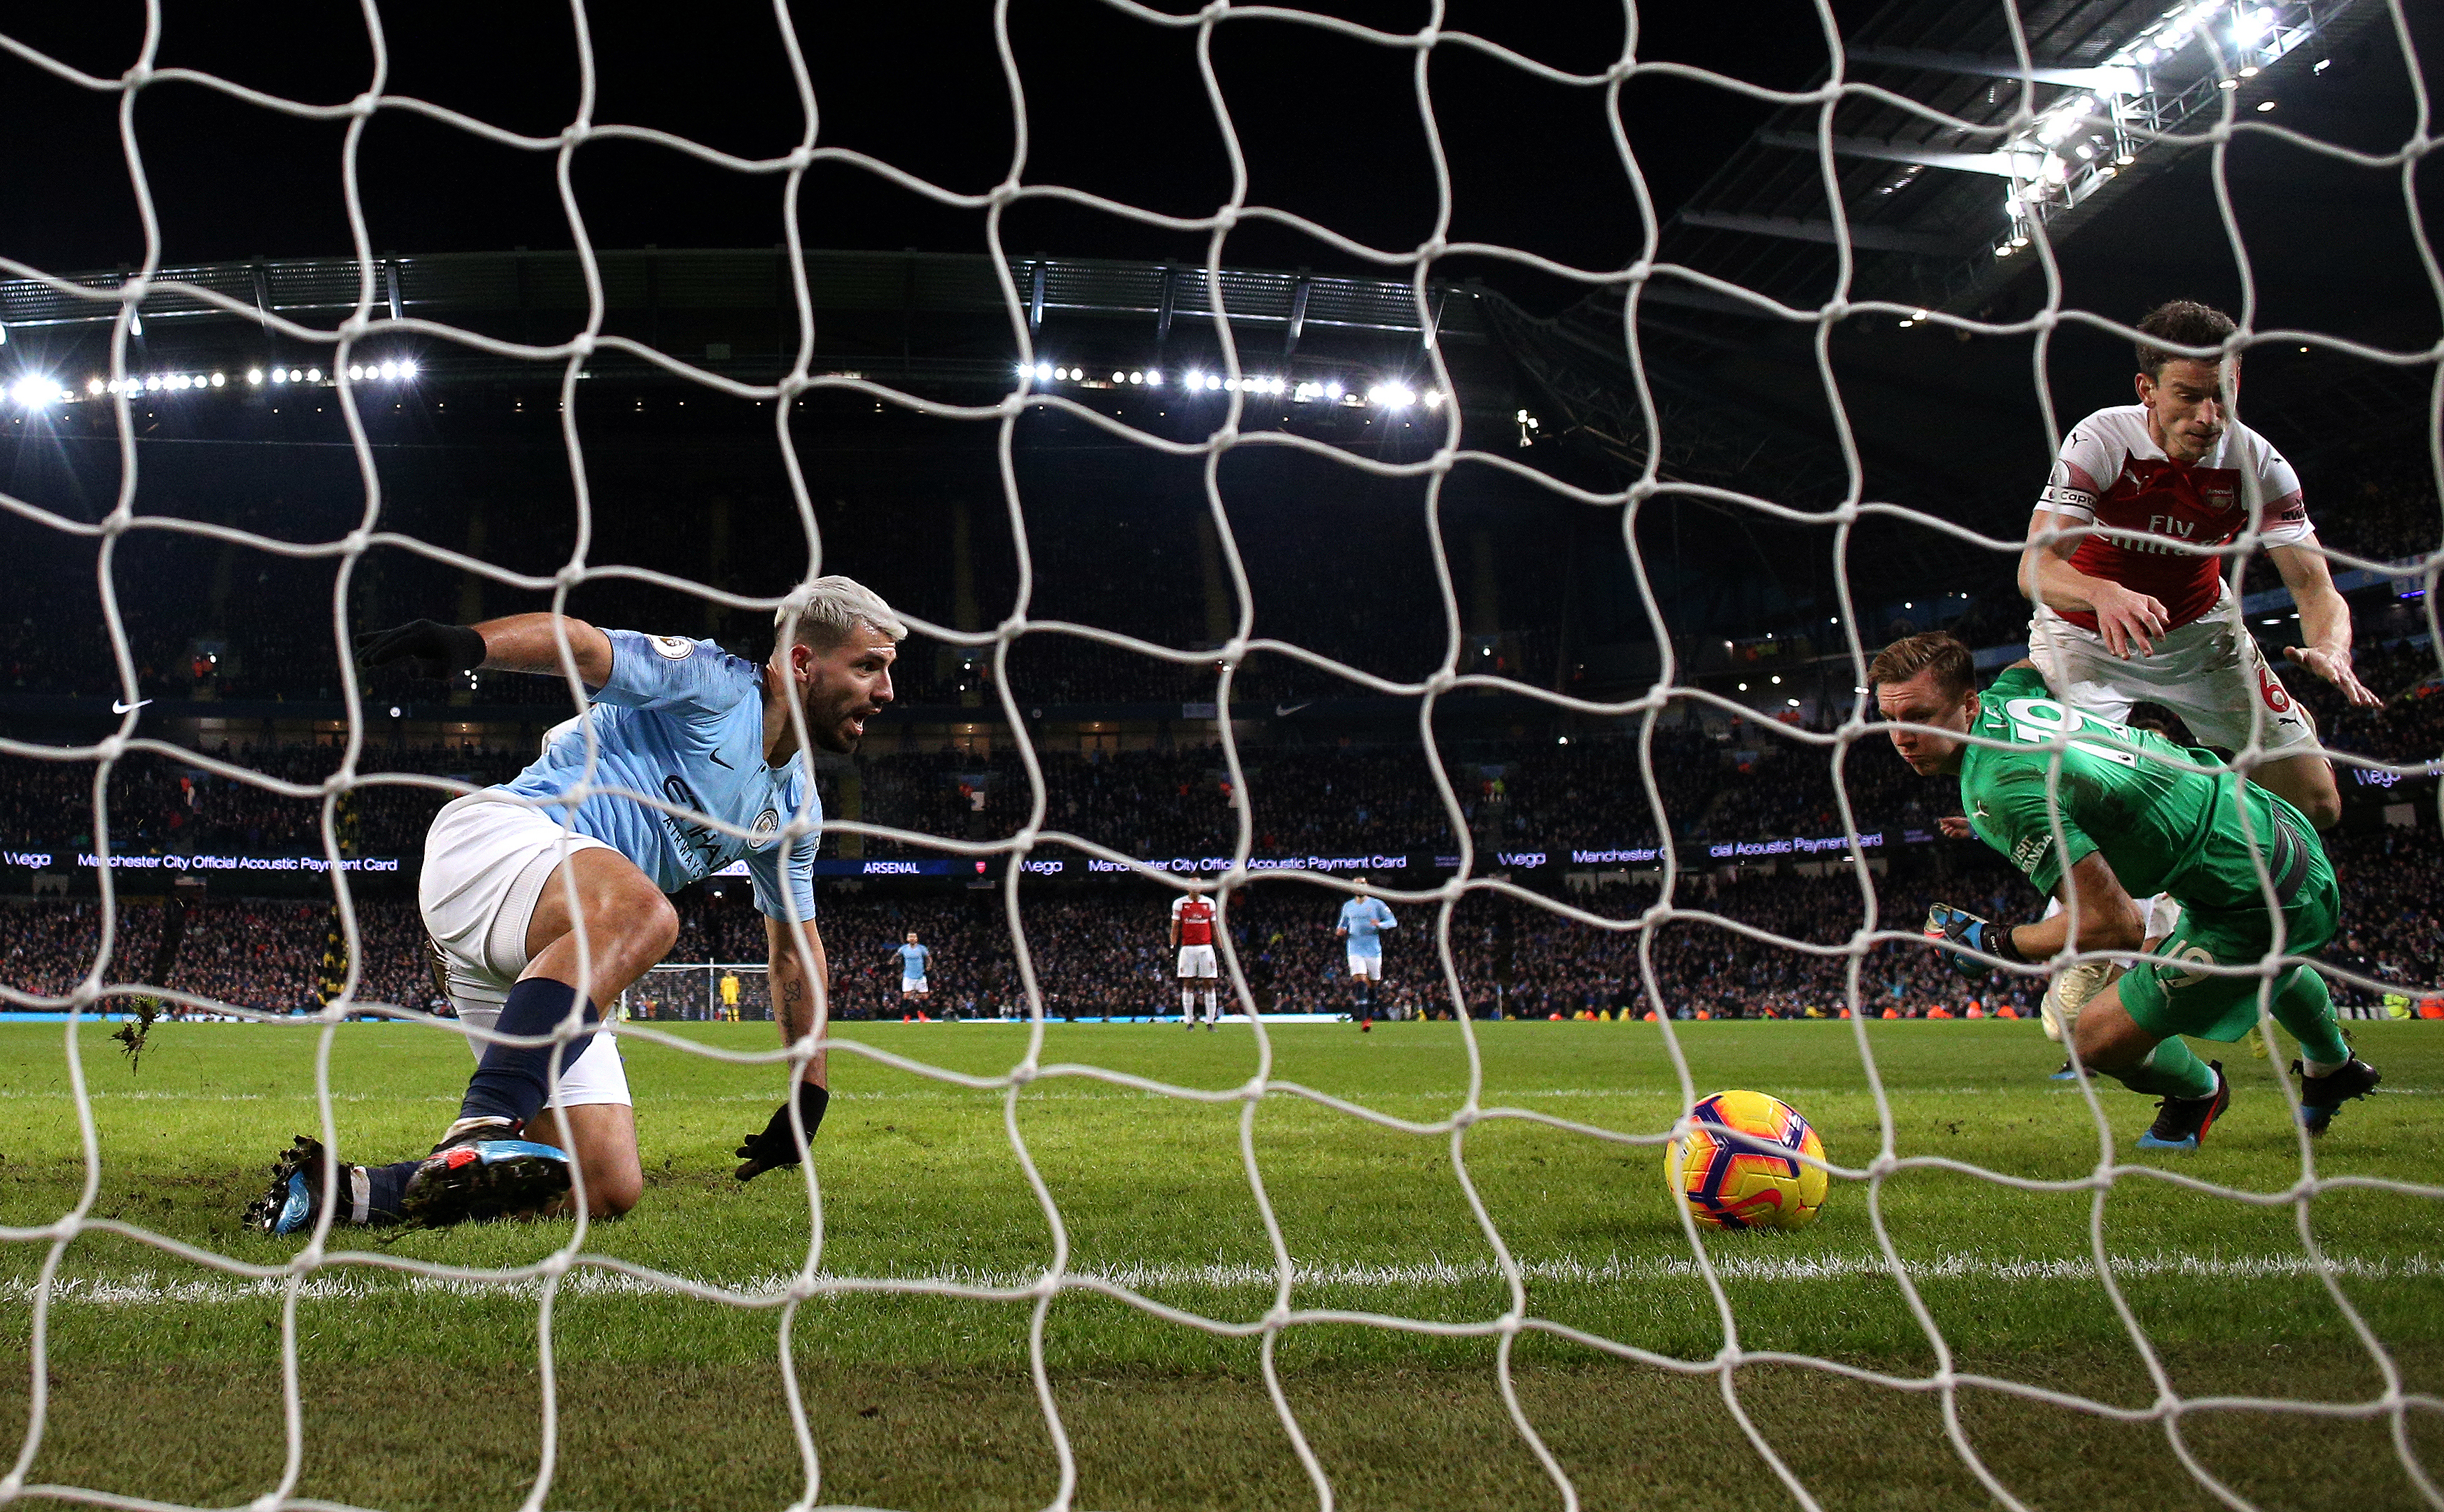 Manchester City's Sergio Aguero (centre) scores his side's third goal of the game during a game against Arsenal